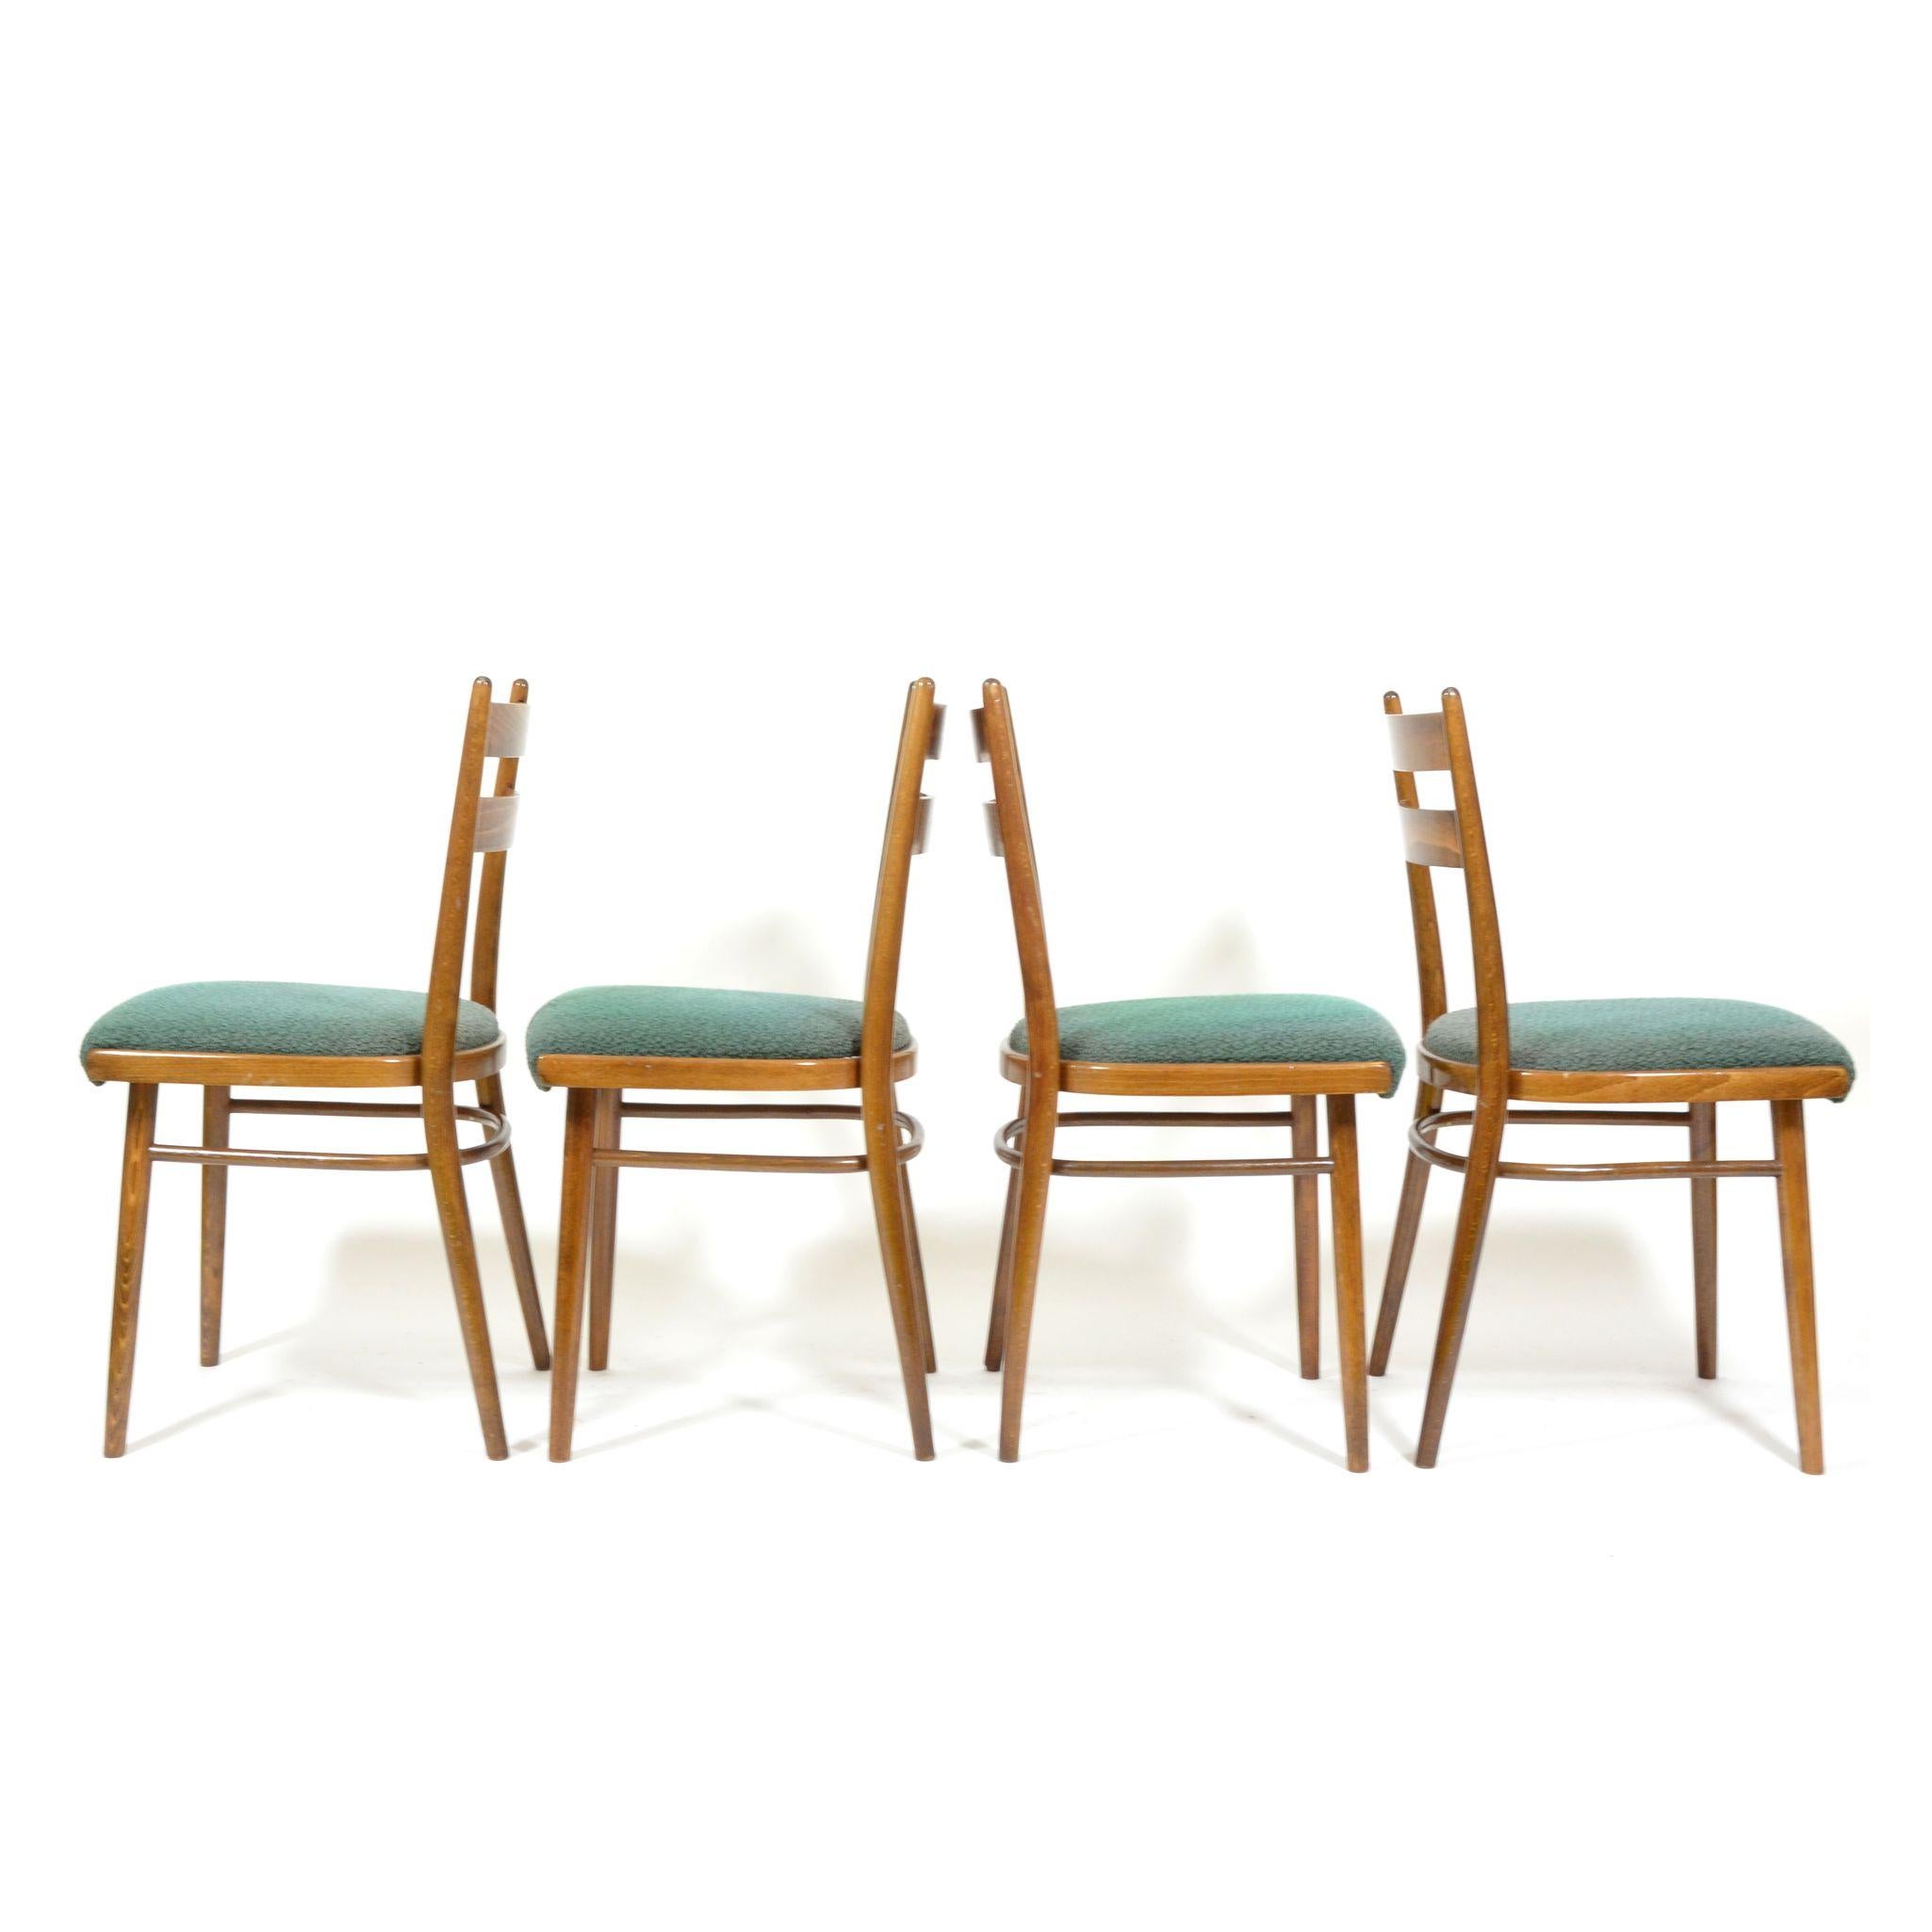 Late 20th Century Set of Four Vintage Dining Chairs, Green Seats, Czechoslovakia, 1970s